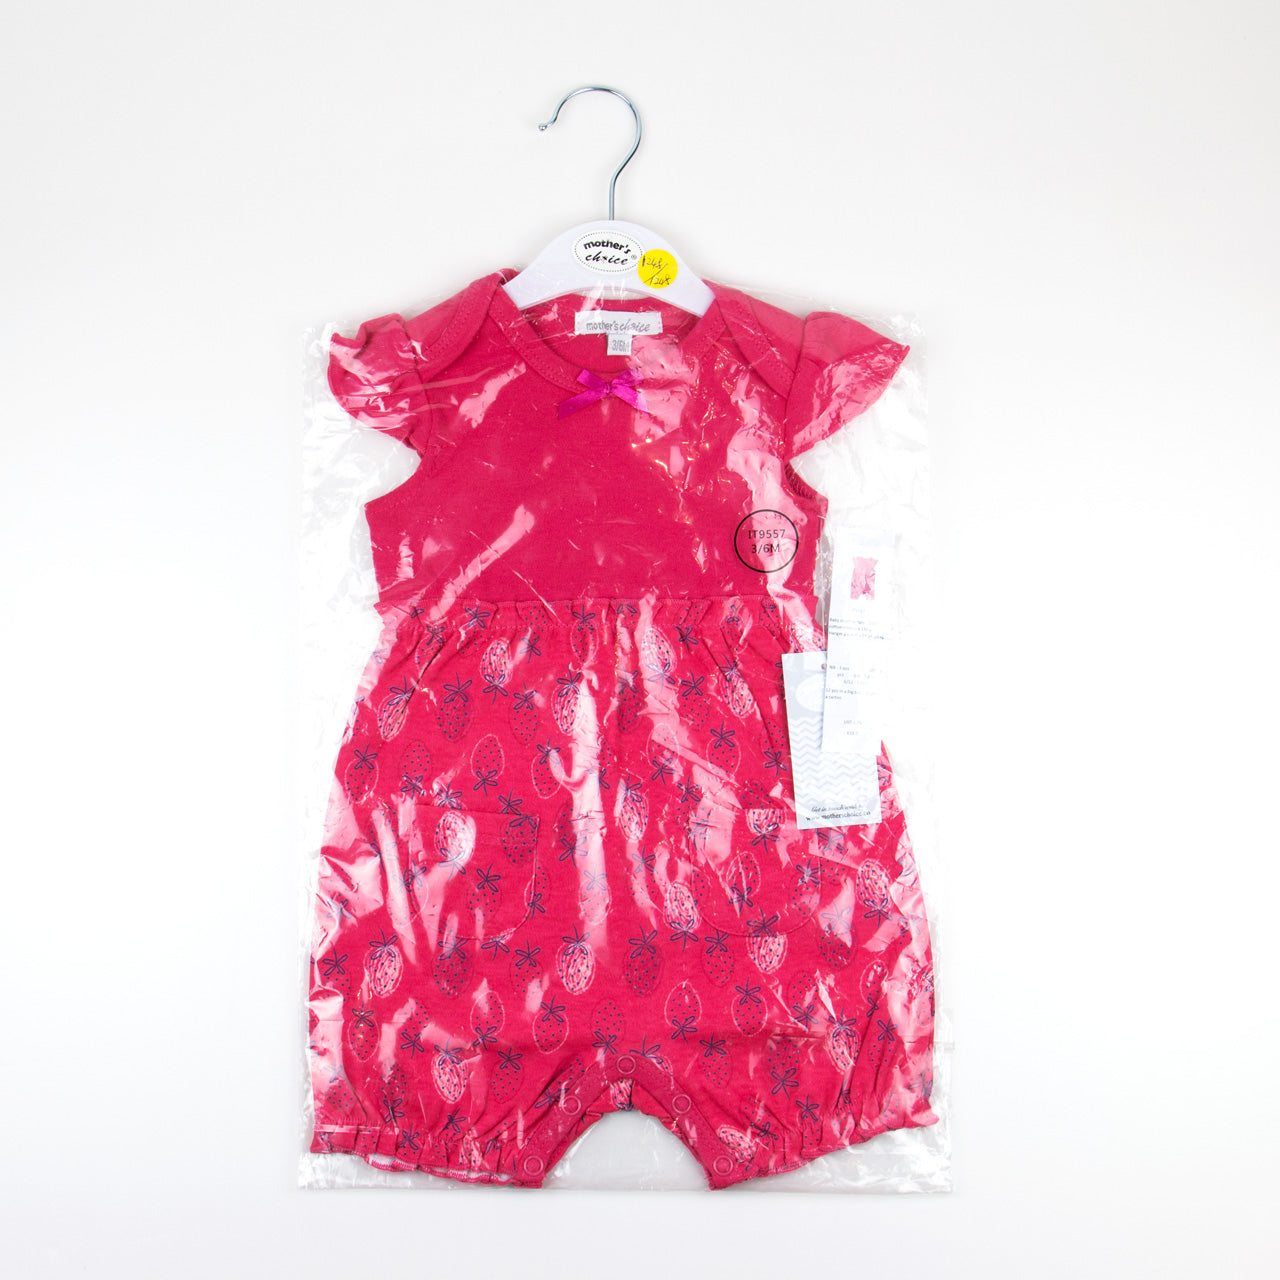 Mother's Choice 1 Piece Baby Sleeveless Romper (Strawberry/IT9557)